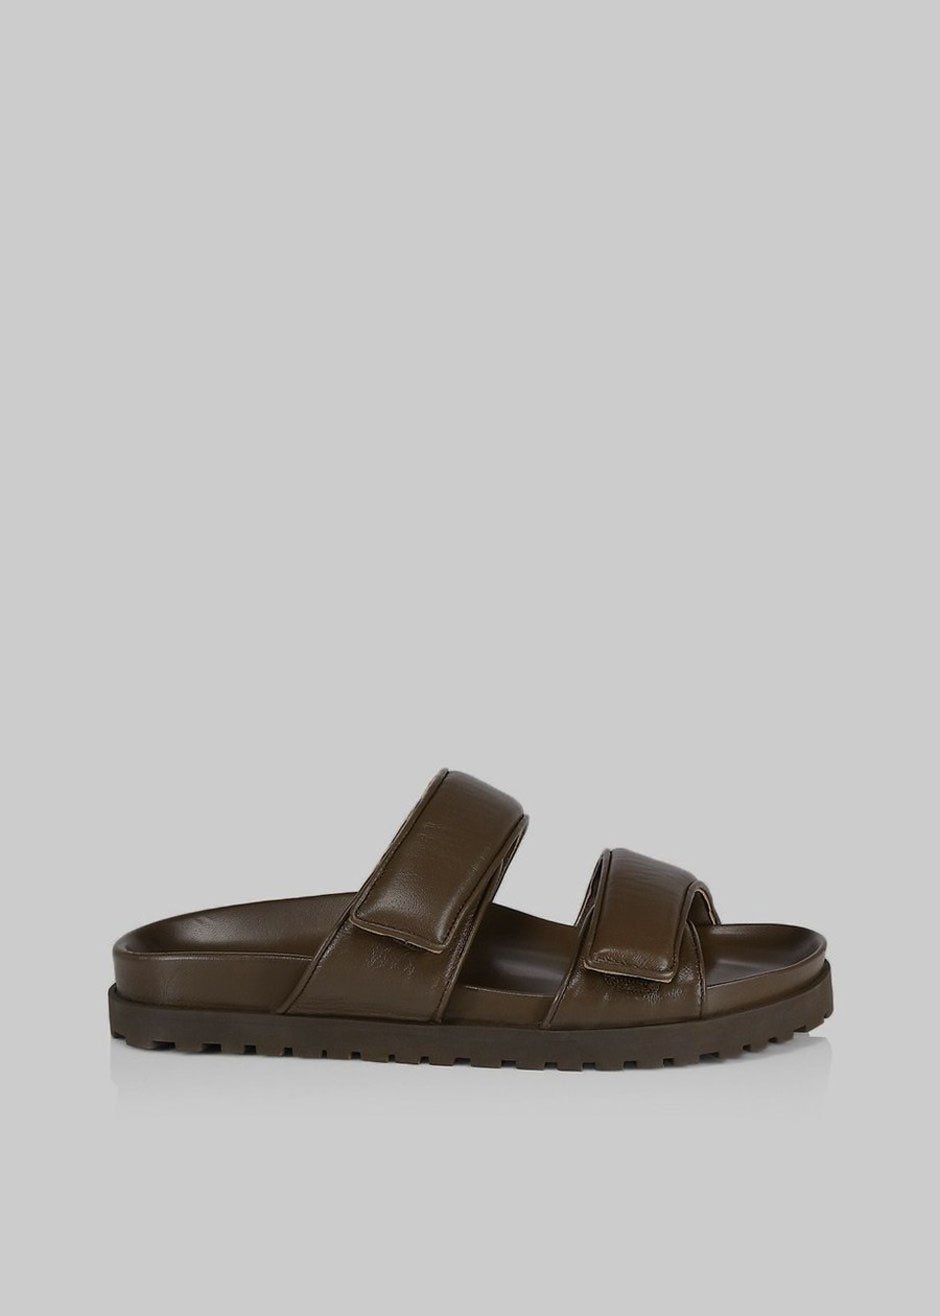 GIA x Pernille Leather Slide Sandals - Brown